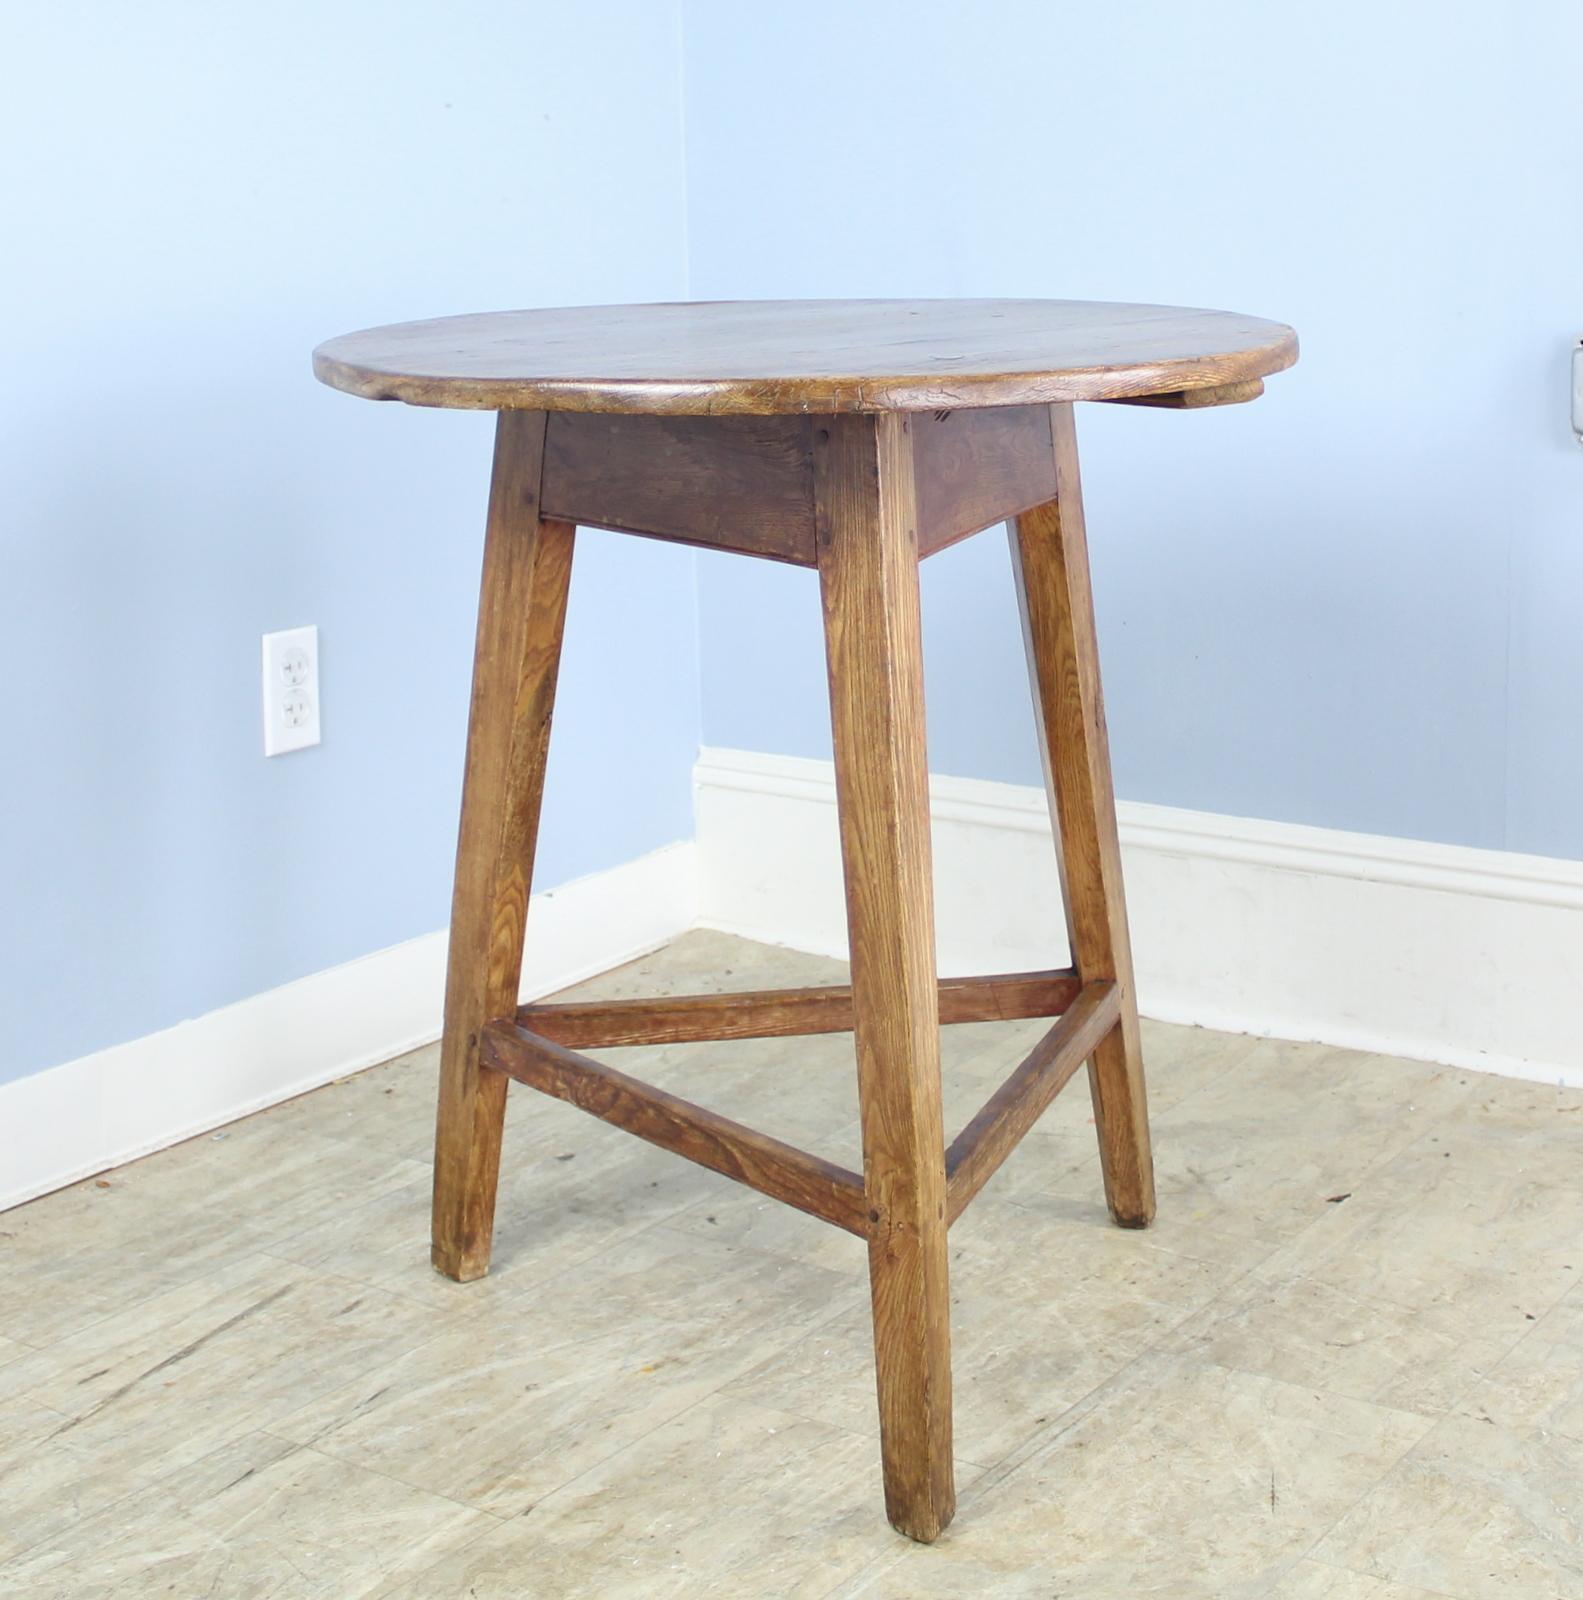 A pretty cricket table with suitable height for use as a good side, lamp or occasional table. The pine top has rich color and good patina. Traditional tripod base construction with a rustic elm base and lower stretchers. The piece is quite early,